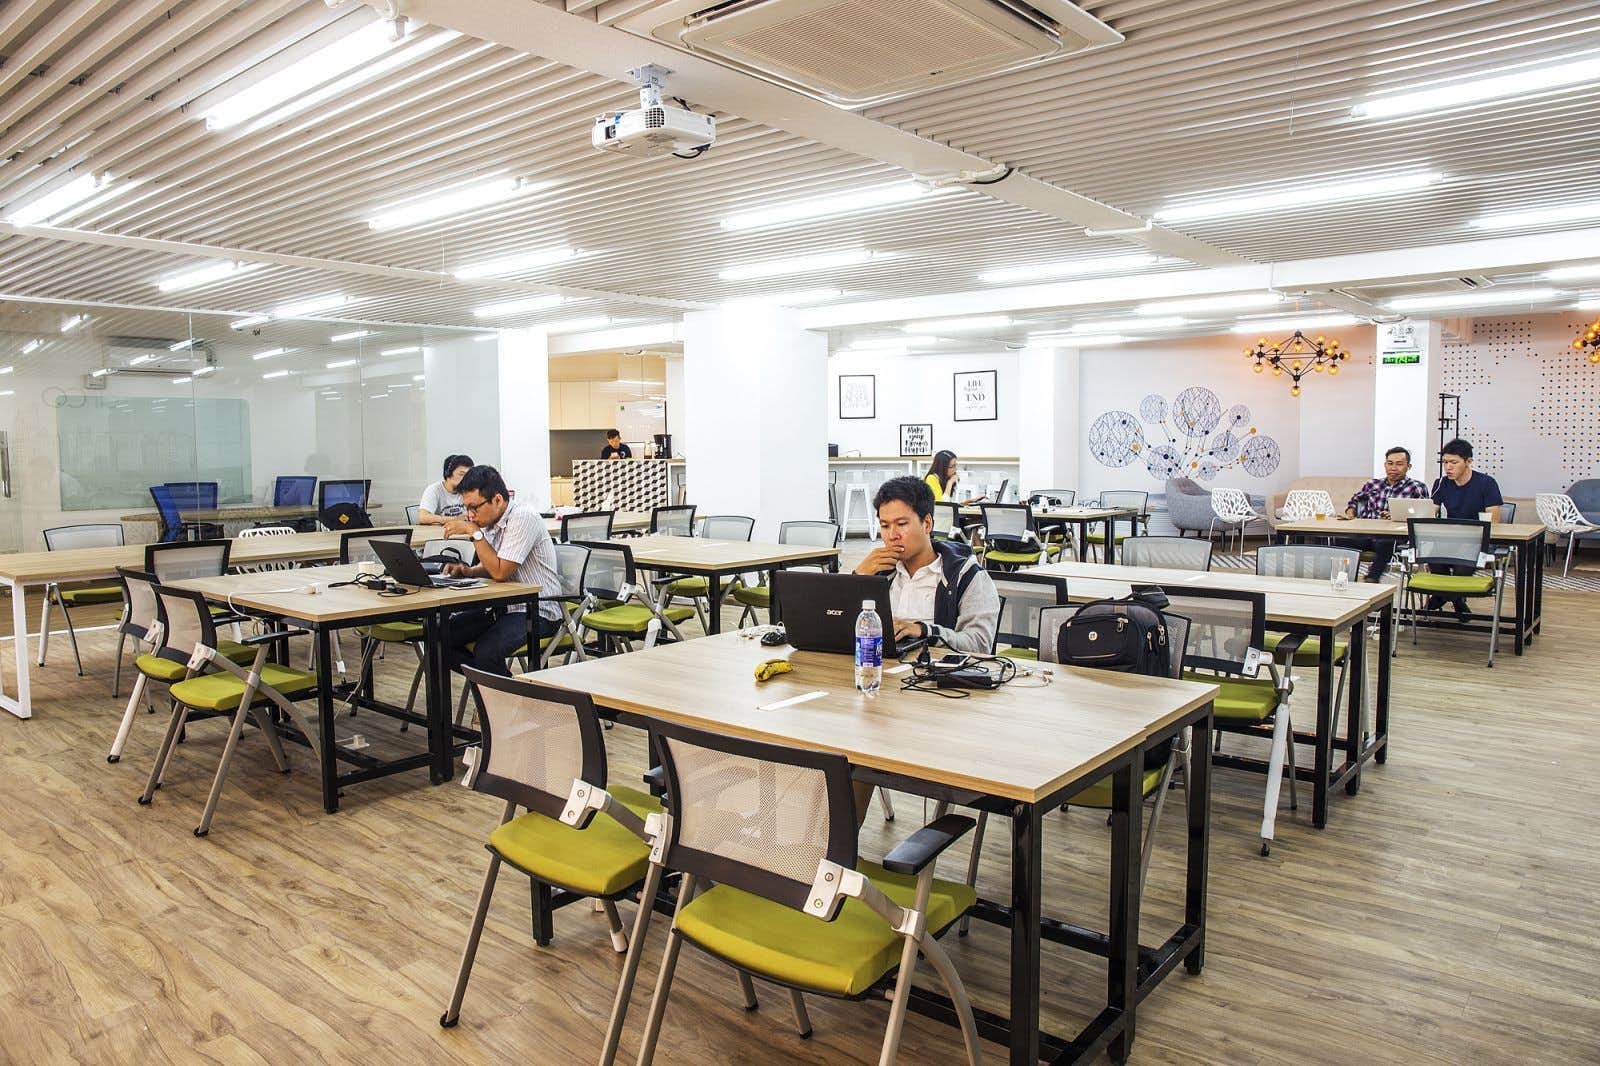 Common co-working space myths